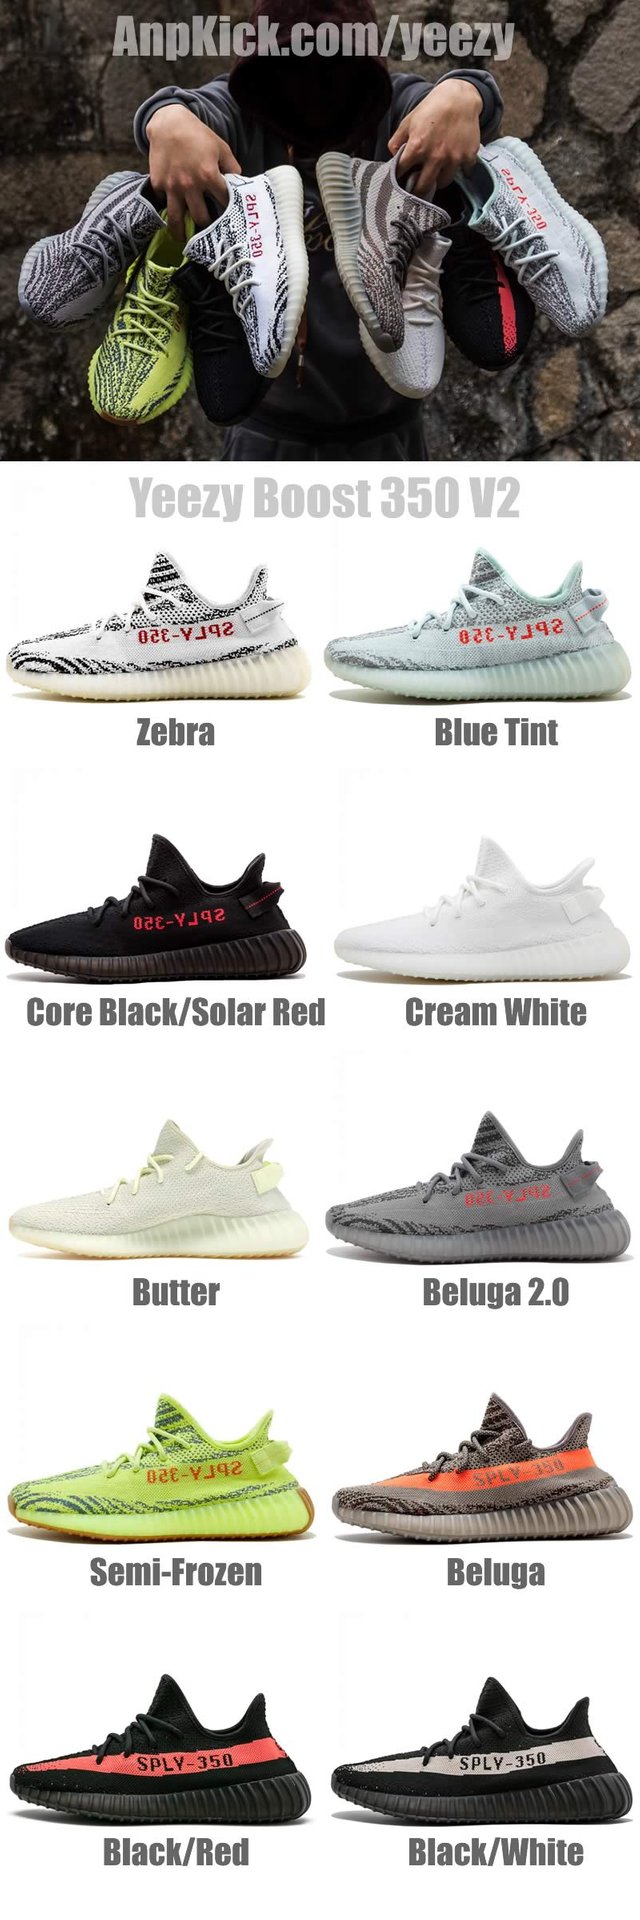 where to buy yeezy shoes online